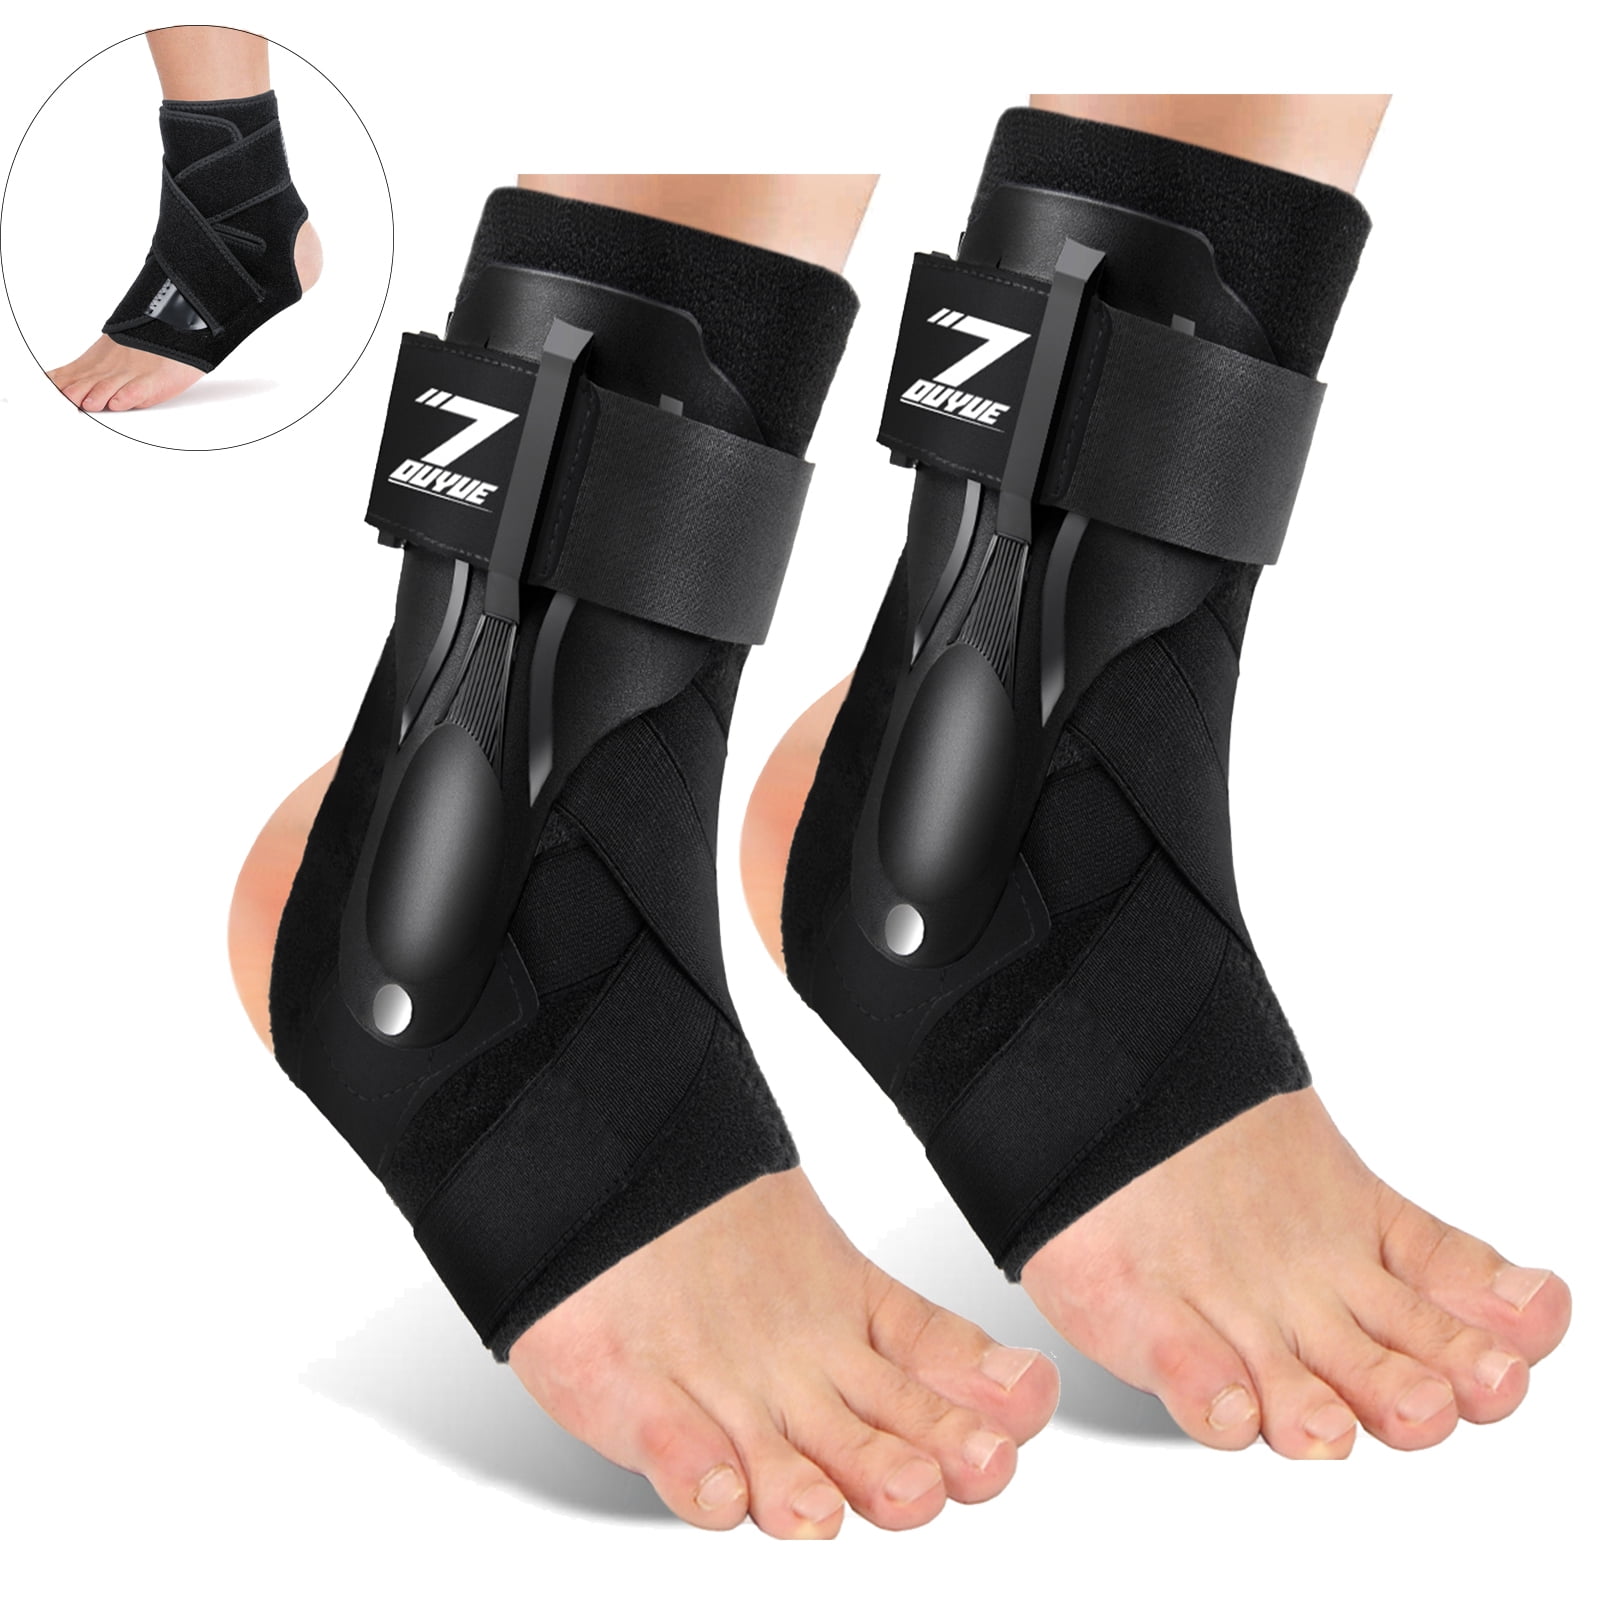 2 Pack Volleyball ankle support brace for women men compression sleeve socks sprained pair tendonitis achilles tendonitis relief plantar fasciitis basketball running soccer protector boot stability 